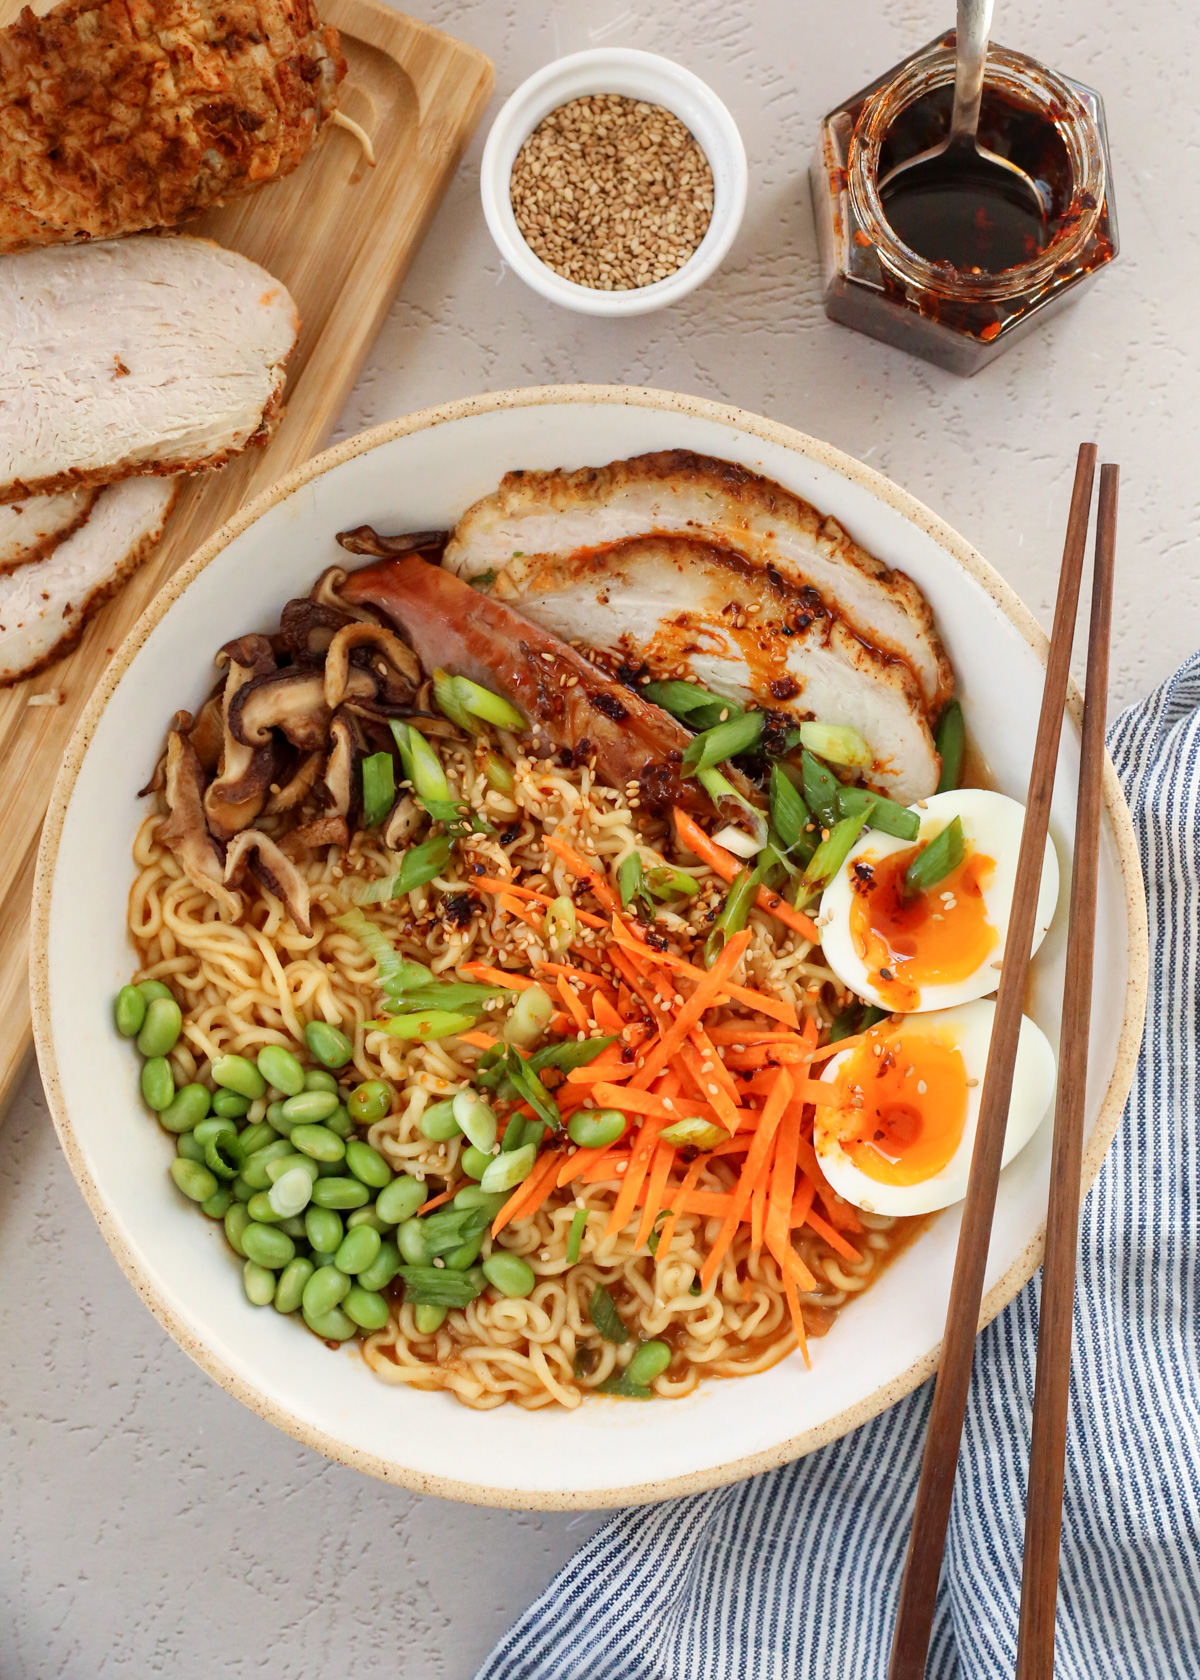 Overhead image of a bowl of leftover turkey ramen, with thick slices of roasted turkey resting inside a ramen bowl topped with carrots, edamame, soft boiled 7 minute eggs, green onions, and mushrooms and a drizzle of chili oil on top